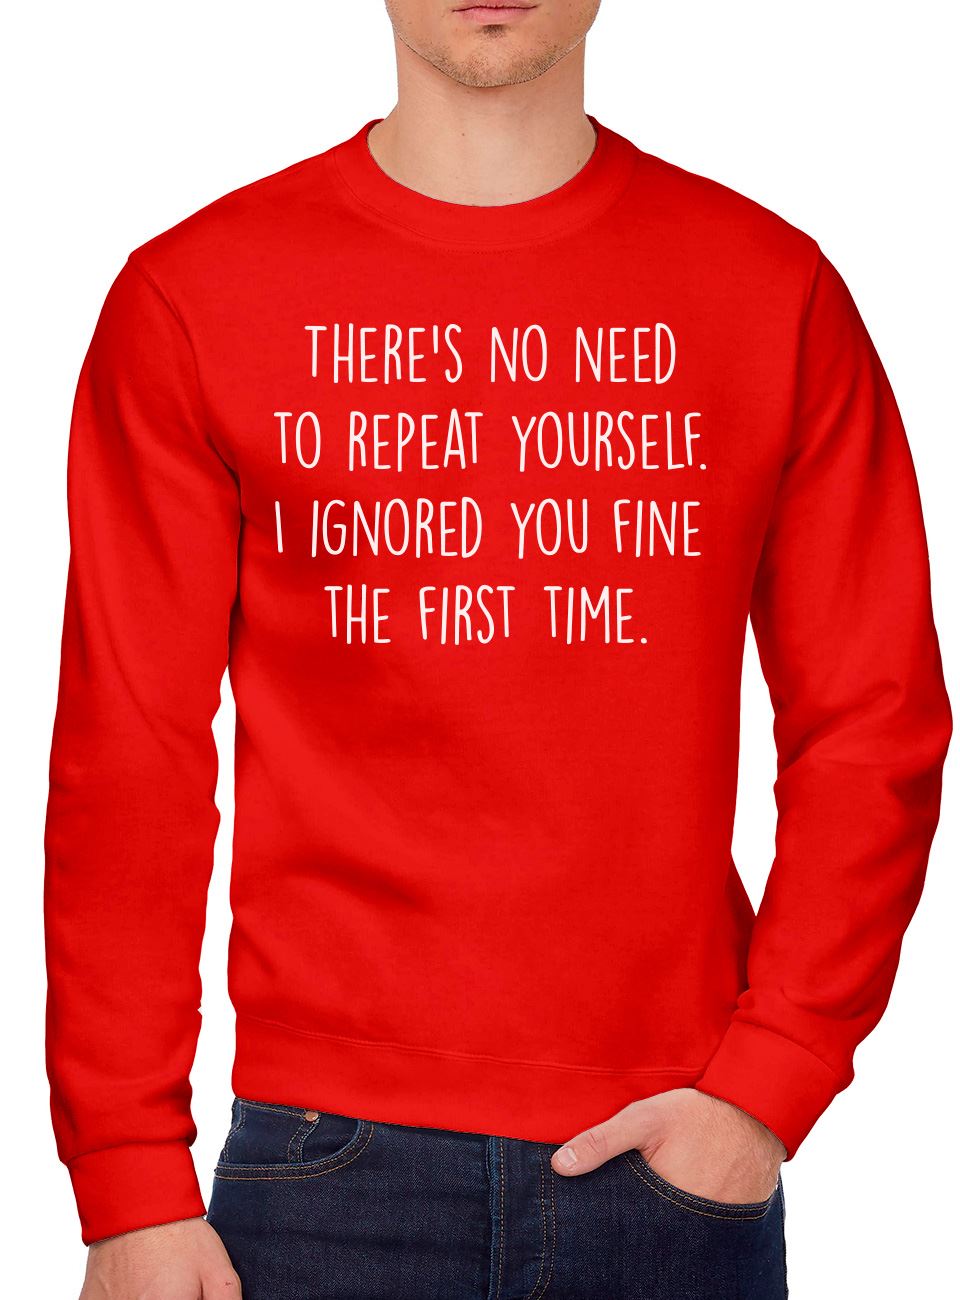 There's No Need To Repeat Yourself - Youth & Mens Sweatshirt